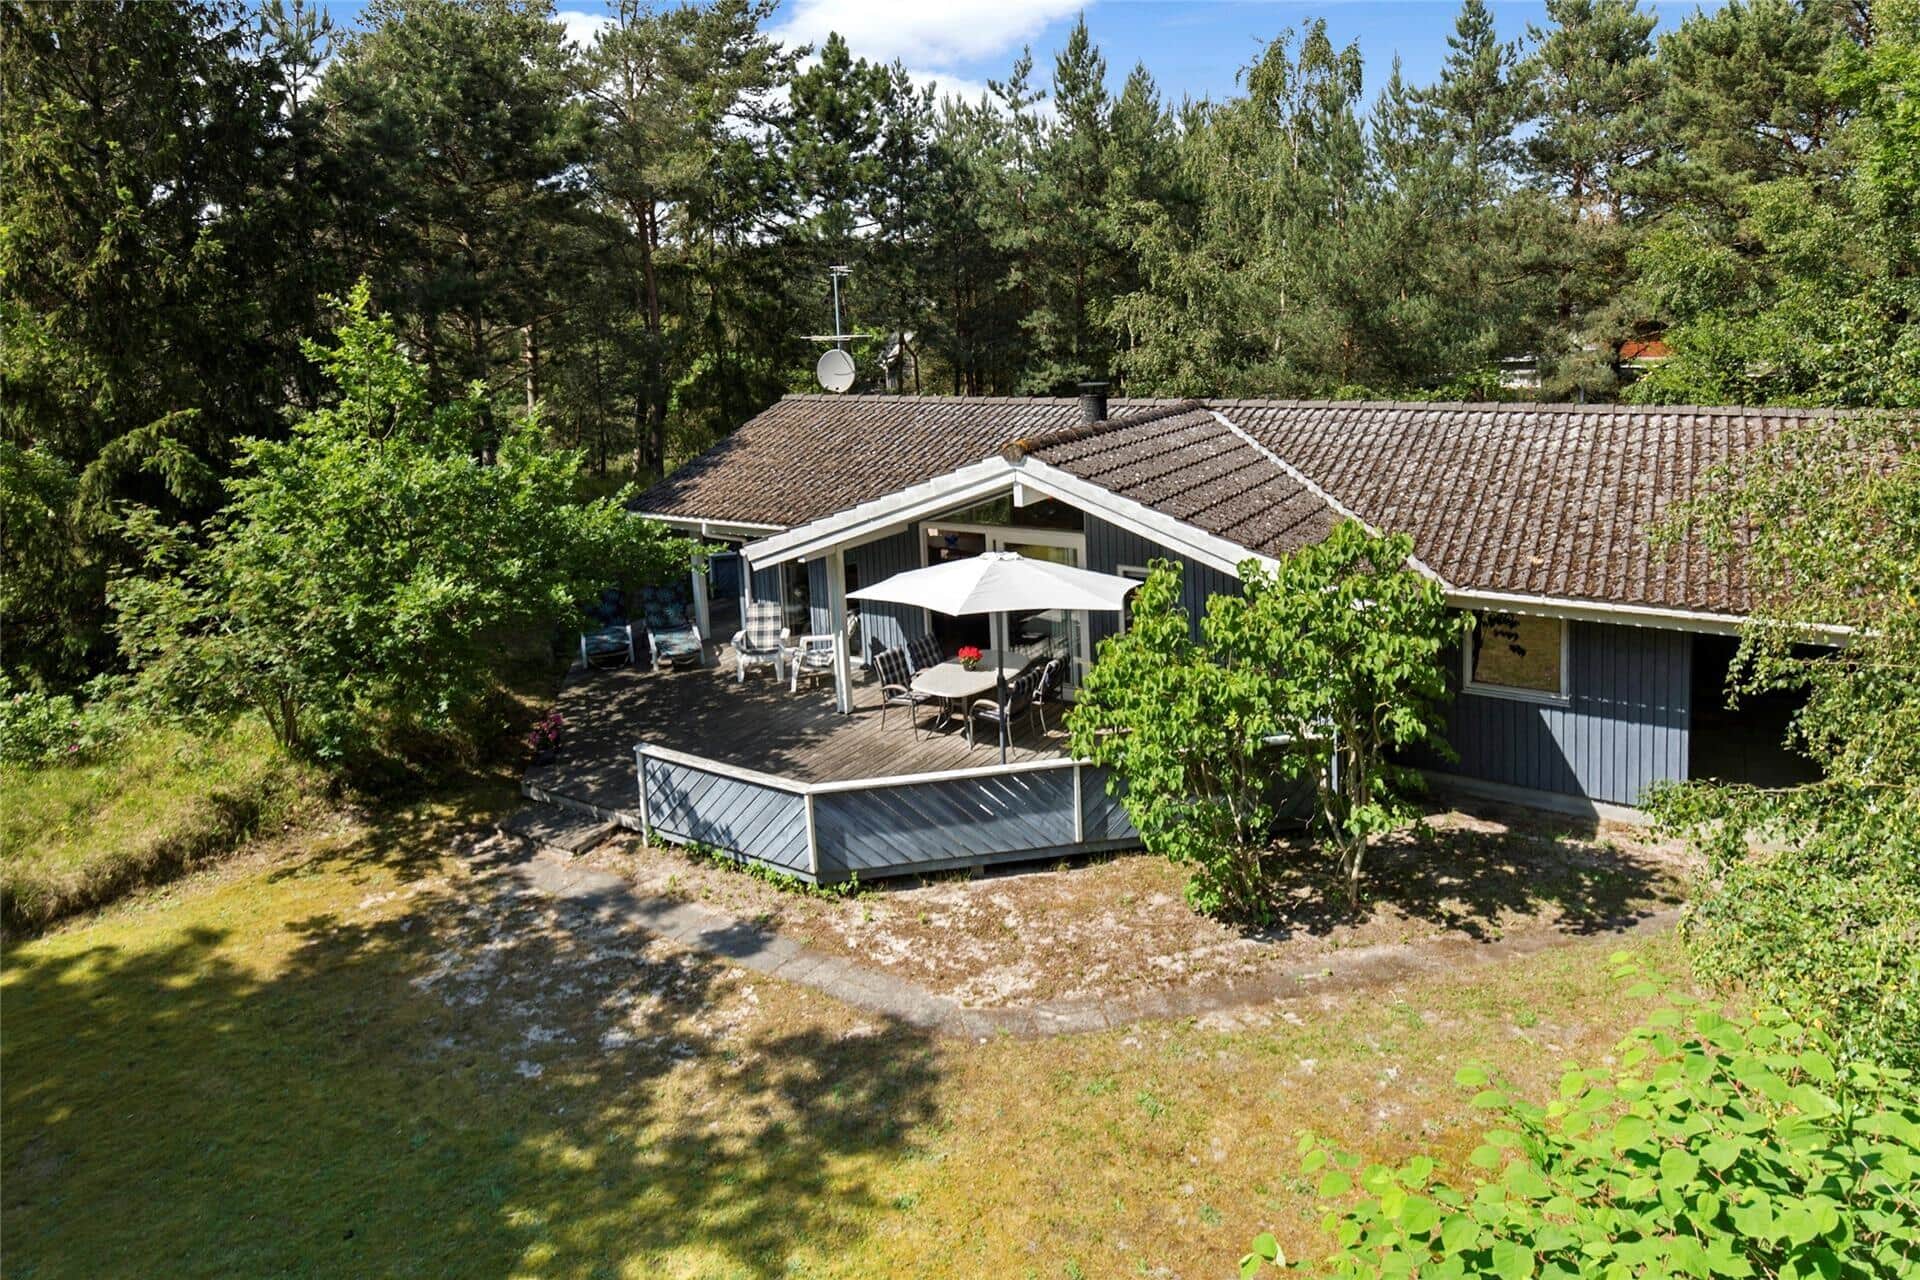 Image 0-10 Holiday-home 1596, Lyngvejen 19, DK - 3720 Aakirkeby